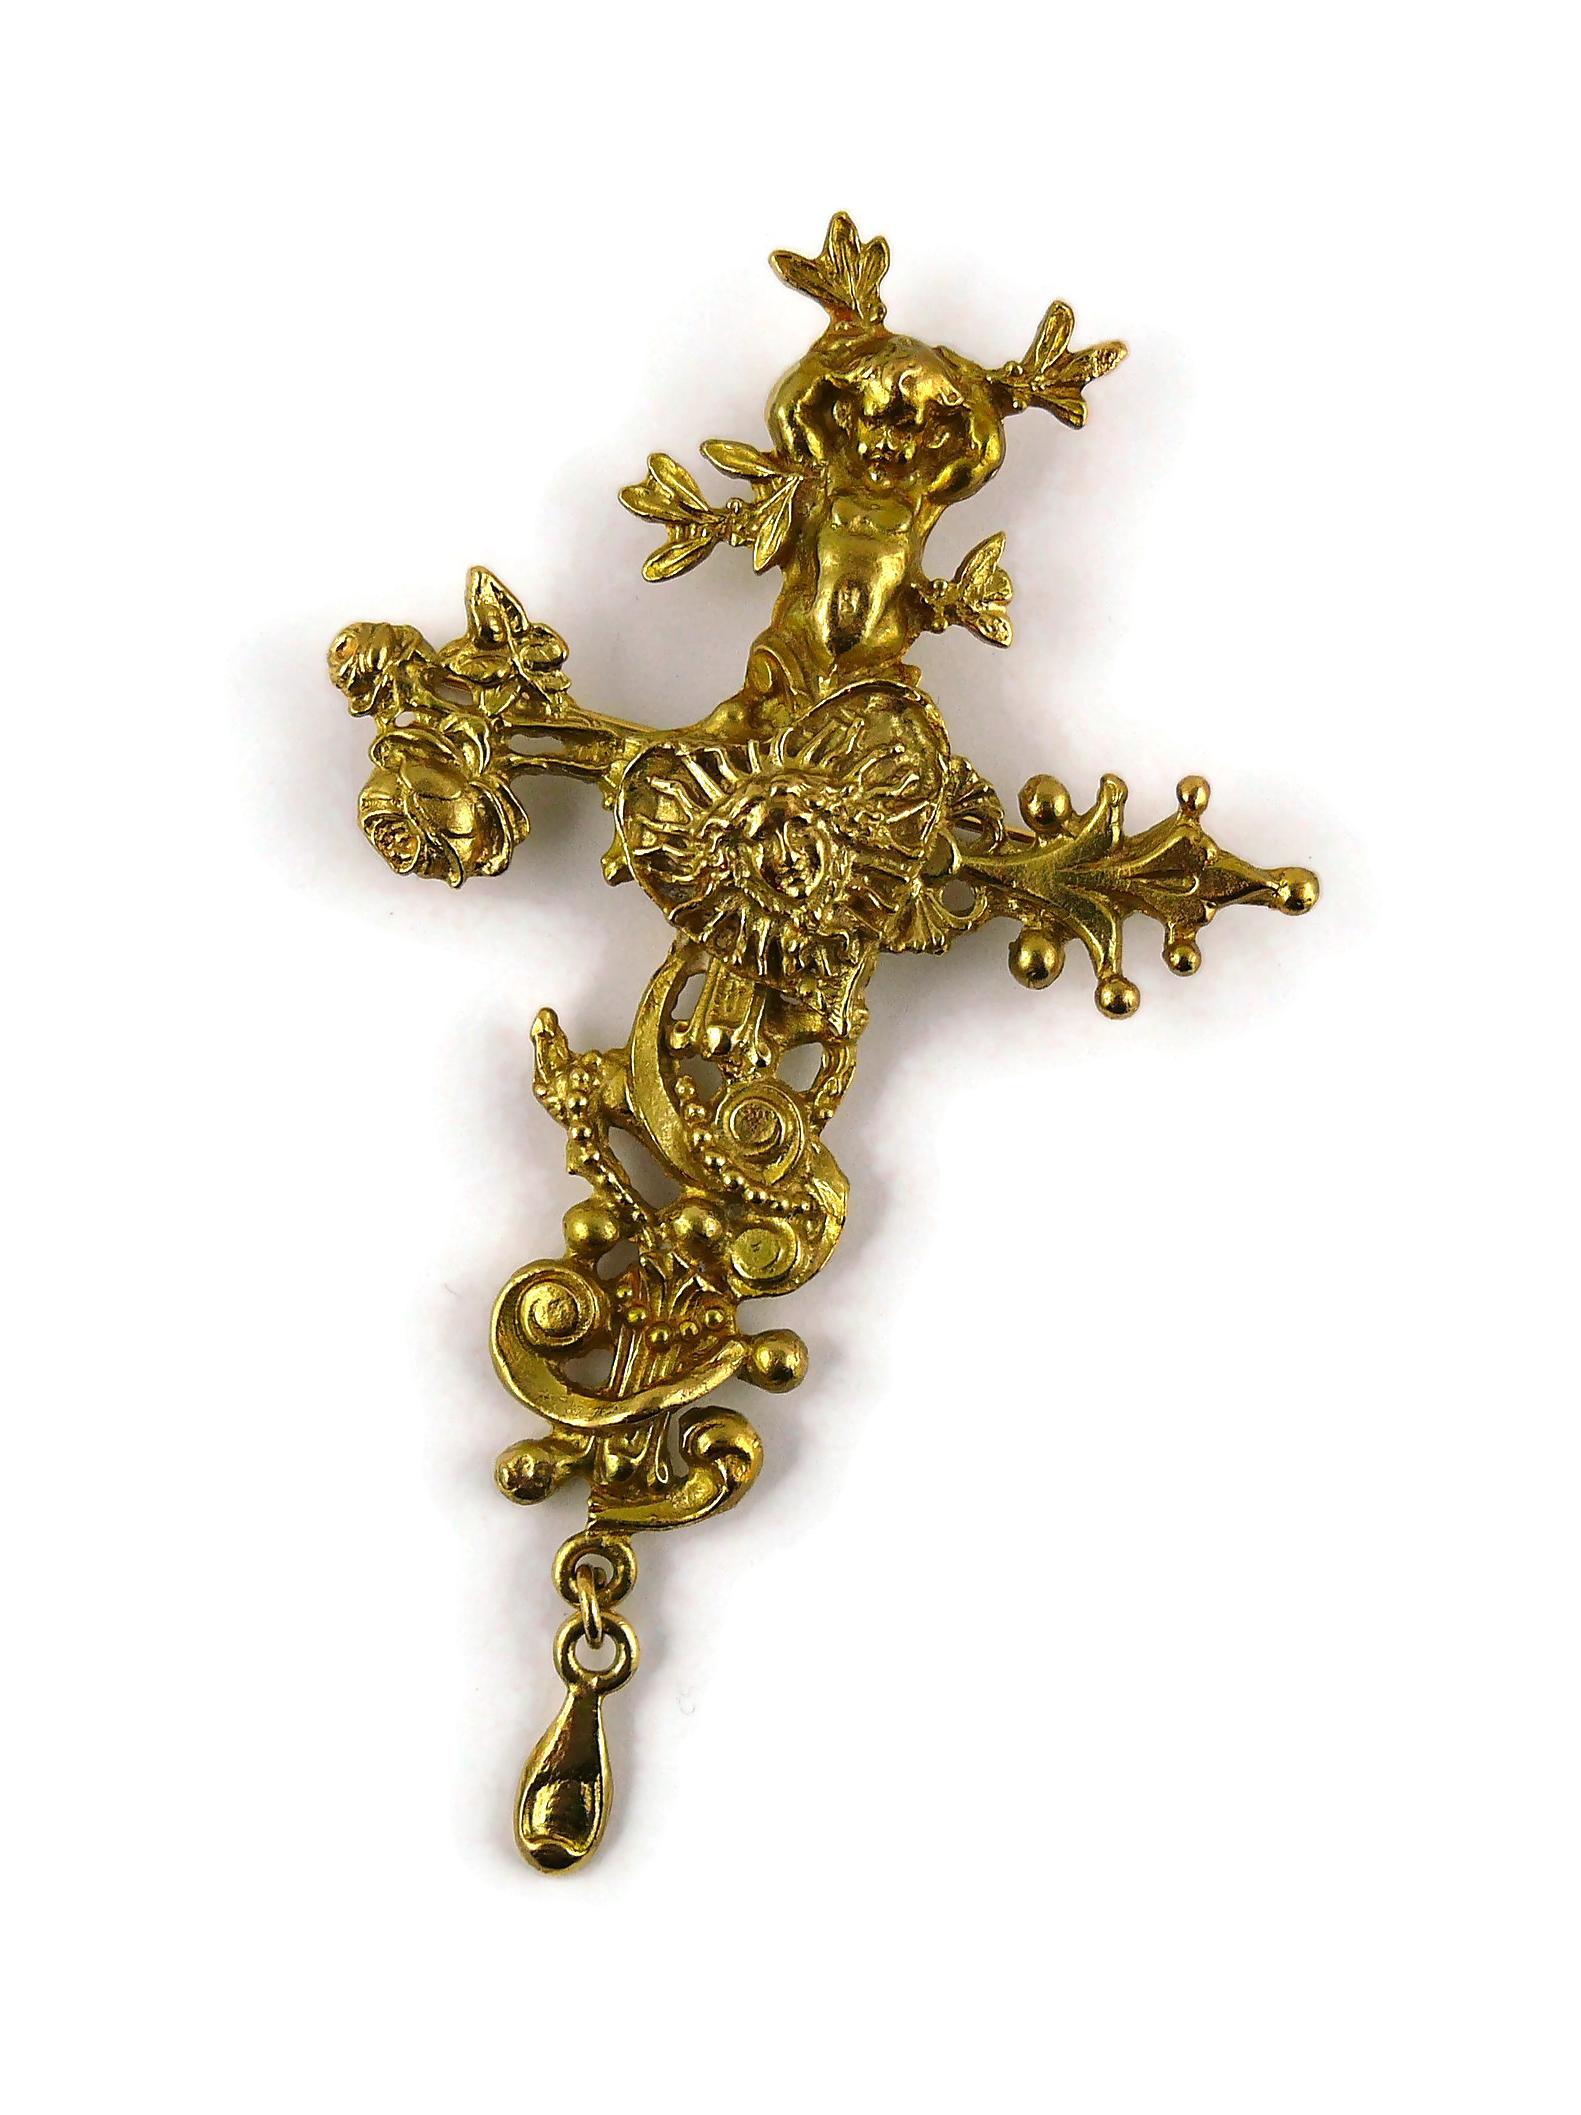 CHRISTIAN LACROIX vintage rare matte gold toned pendant/brooch featuring in a detailed setting a putto, a heart and the allegorical portrait of King Louis XIV founder of the Comedie Francaise.

May be worn as a pendant or brooch.

Marked CHRISTIAN